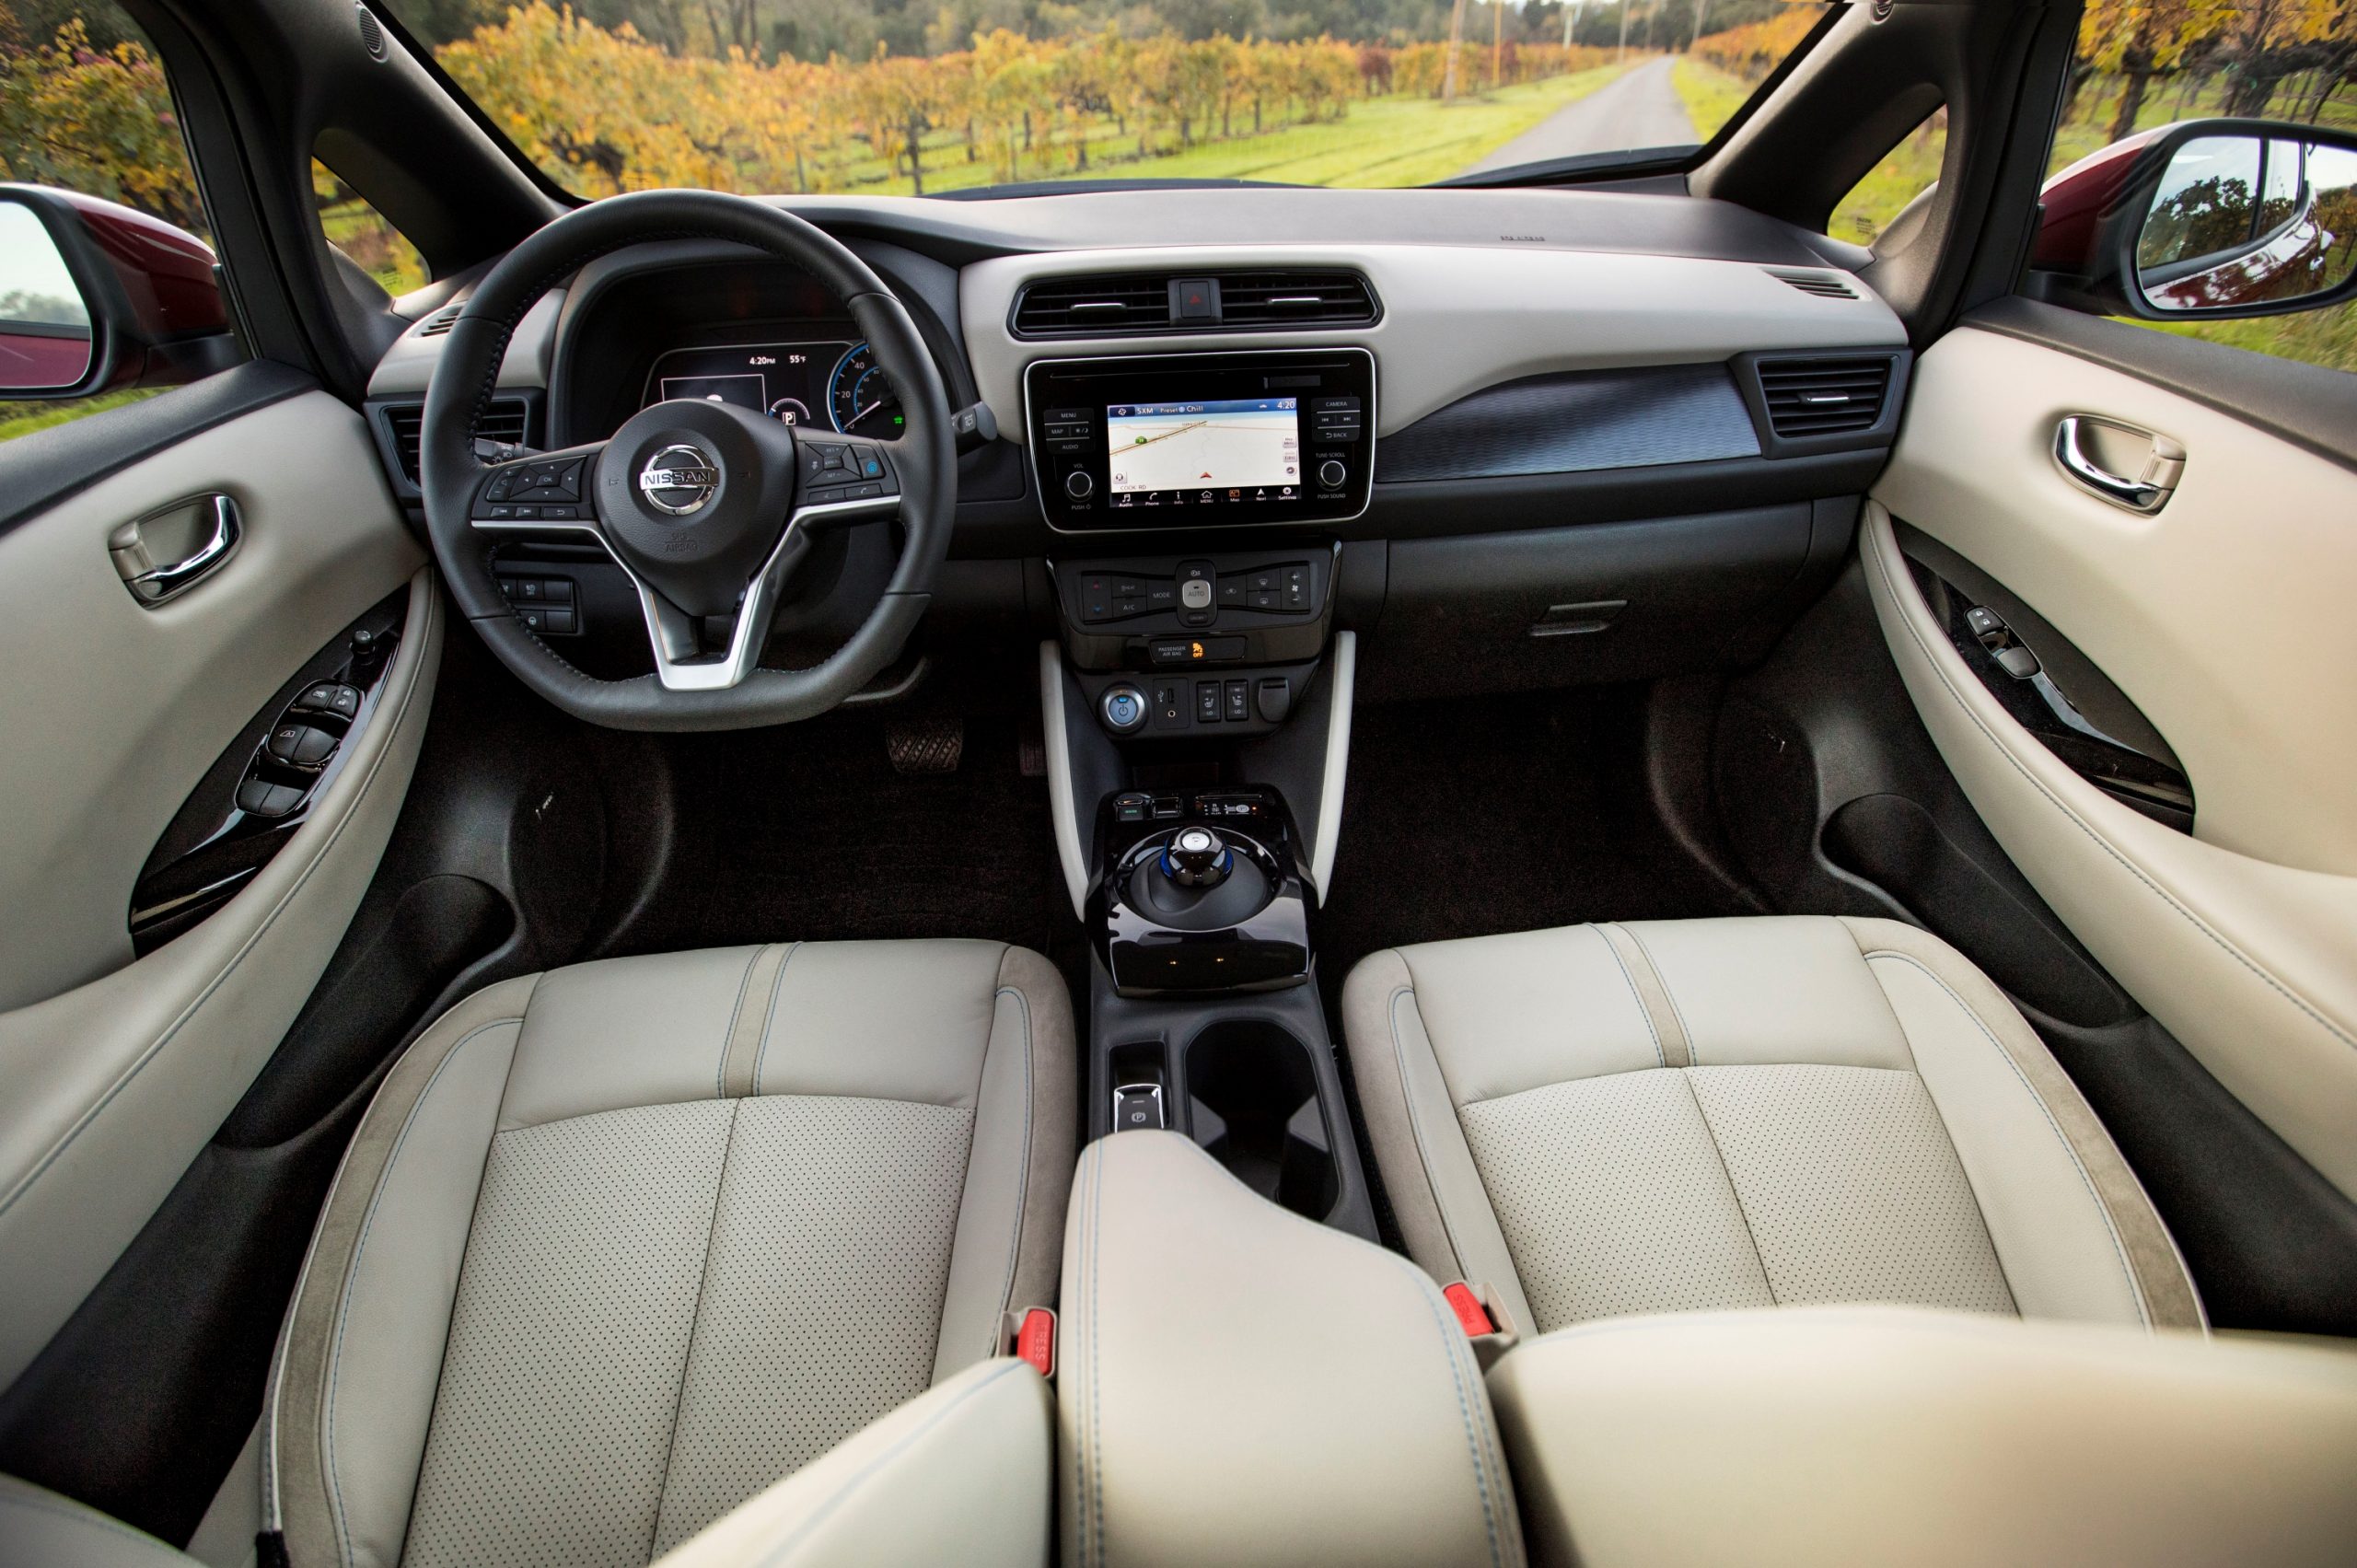 The beige leather interior of Consumer Reports' best EV for under $20K, the Nissan Leaf